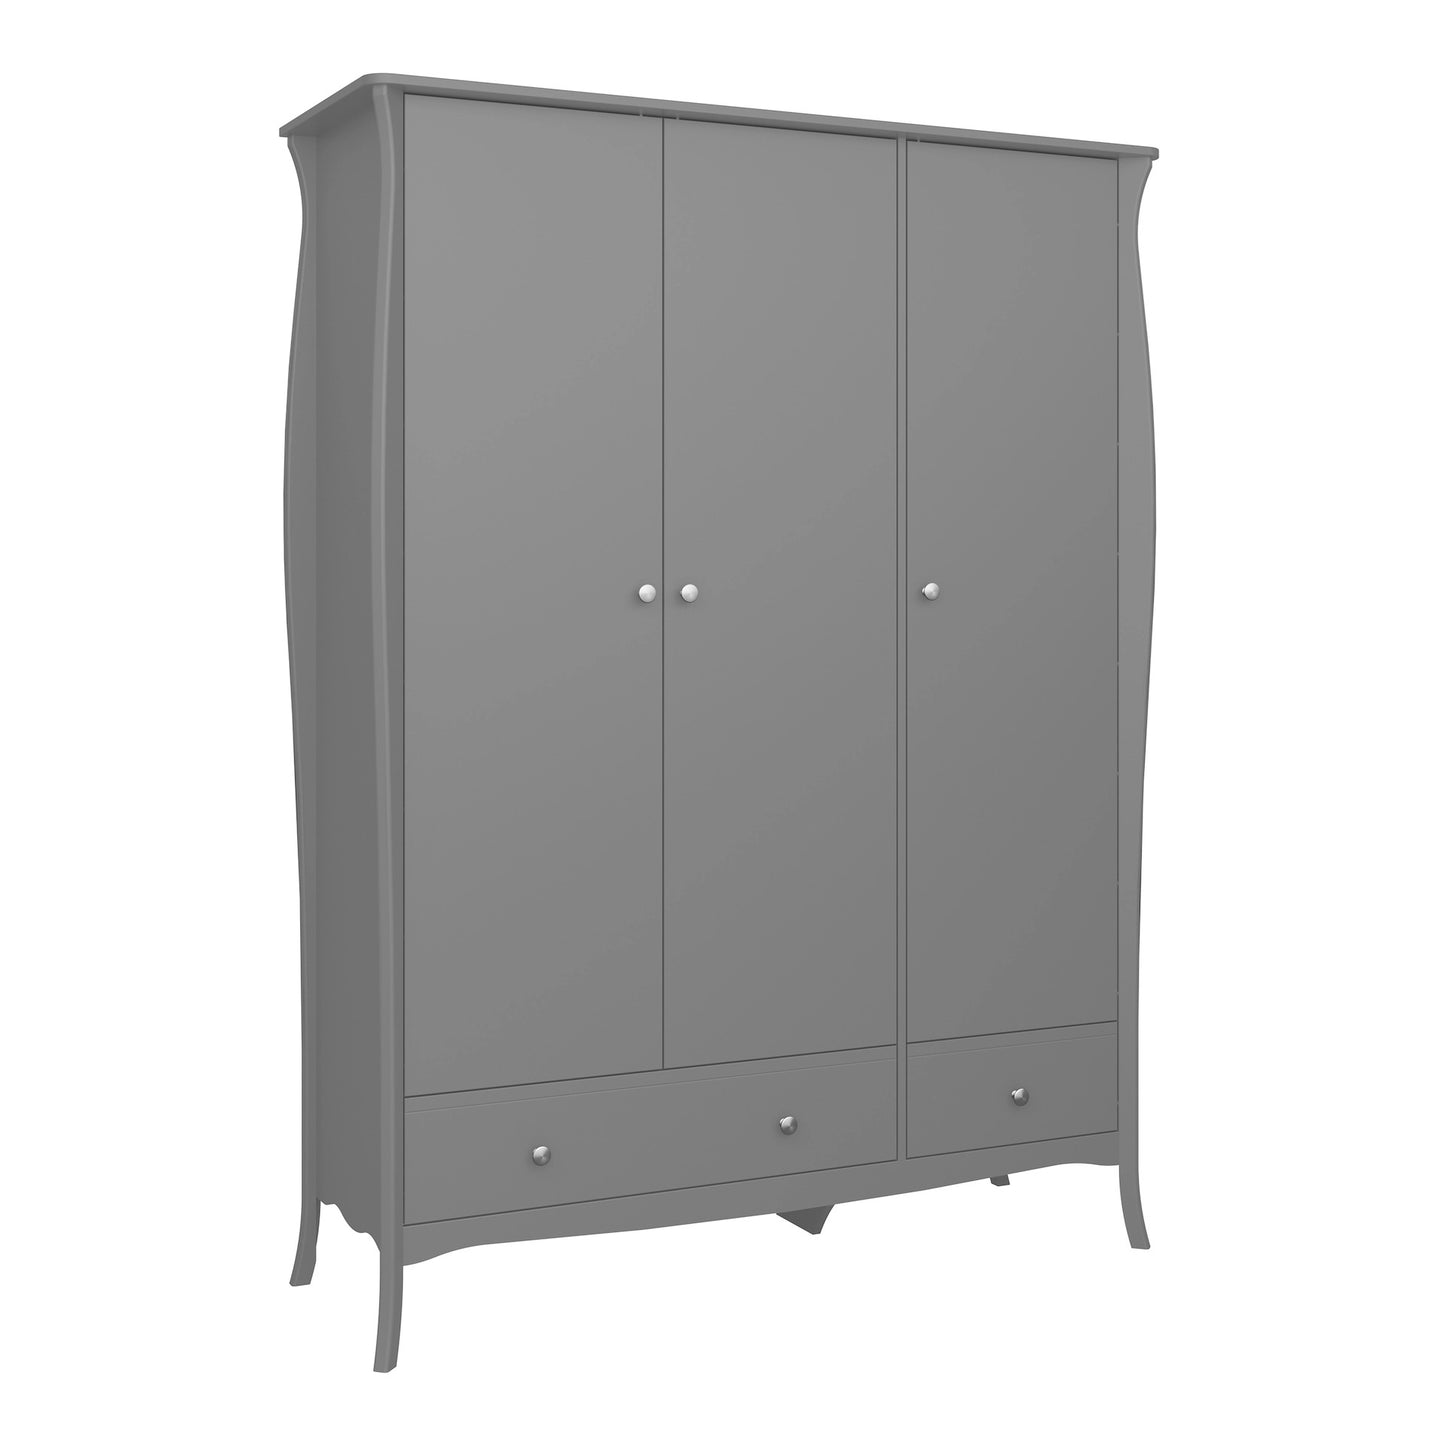 Furniture To Go Baroque 3Dr 2 Drw Robe Grey